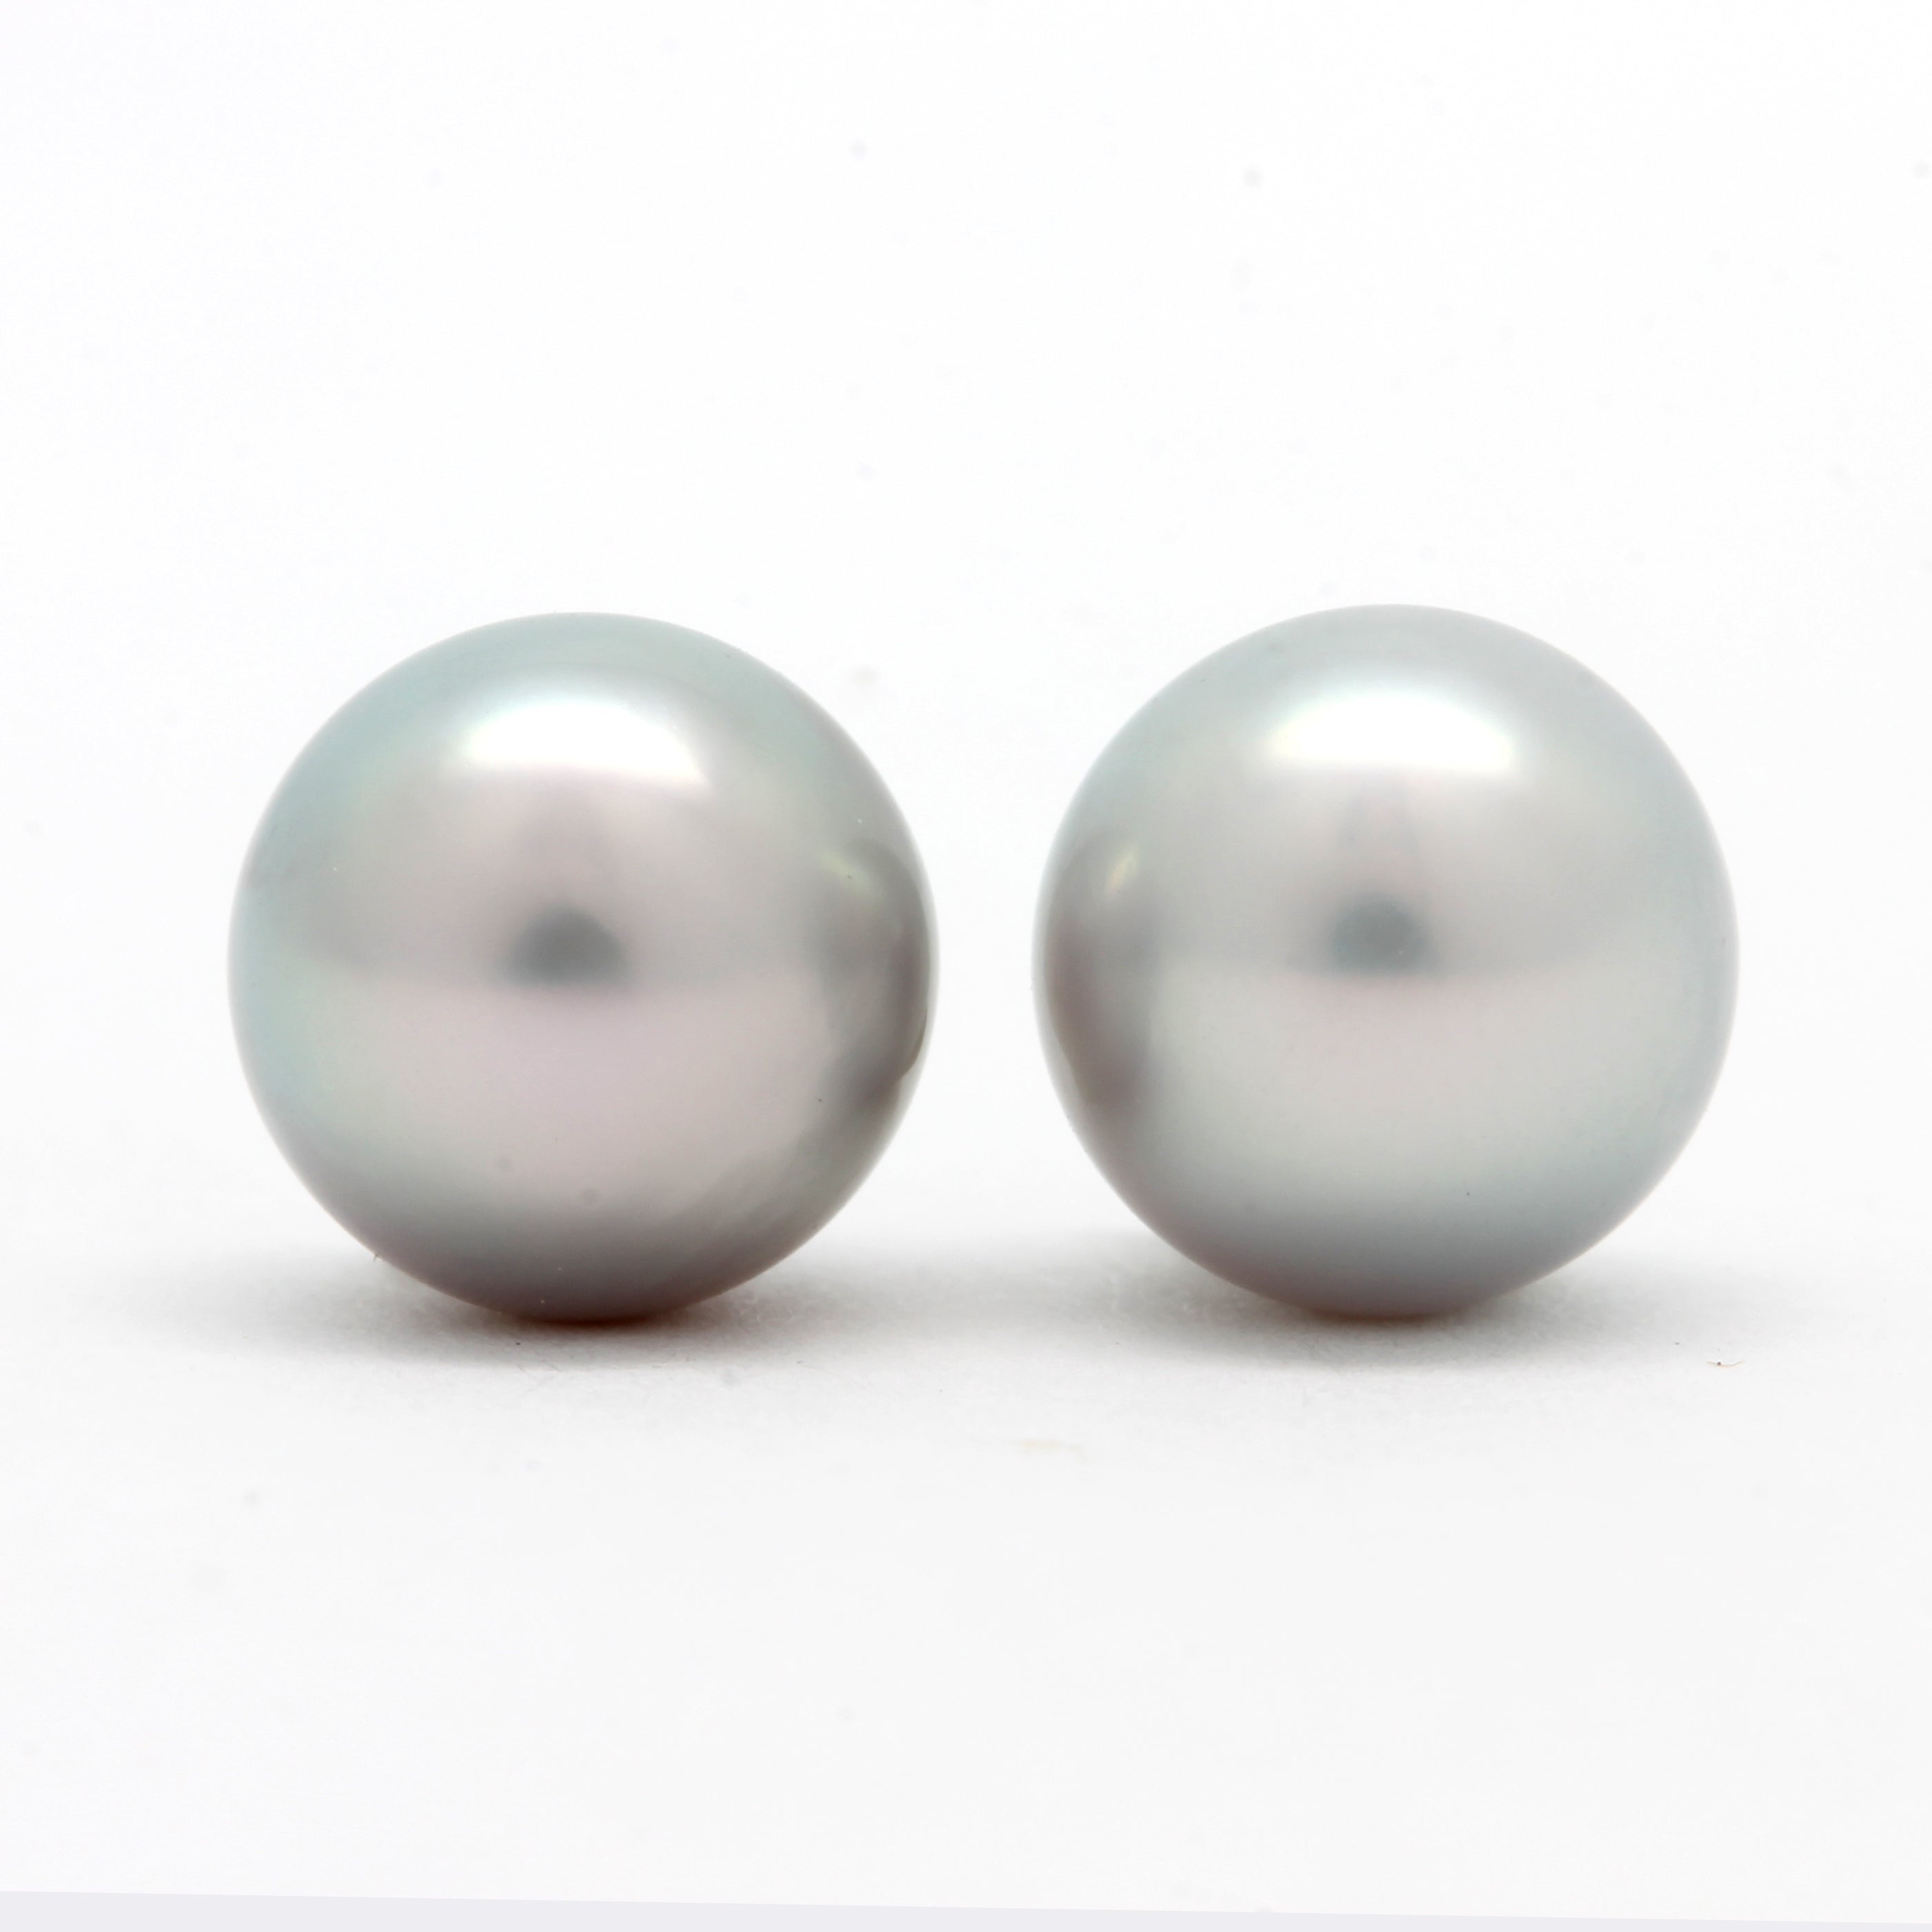 Pair of 8.5 mm Cortez Pearls